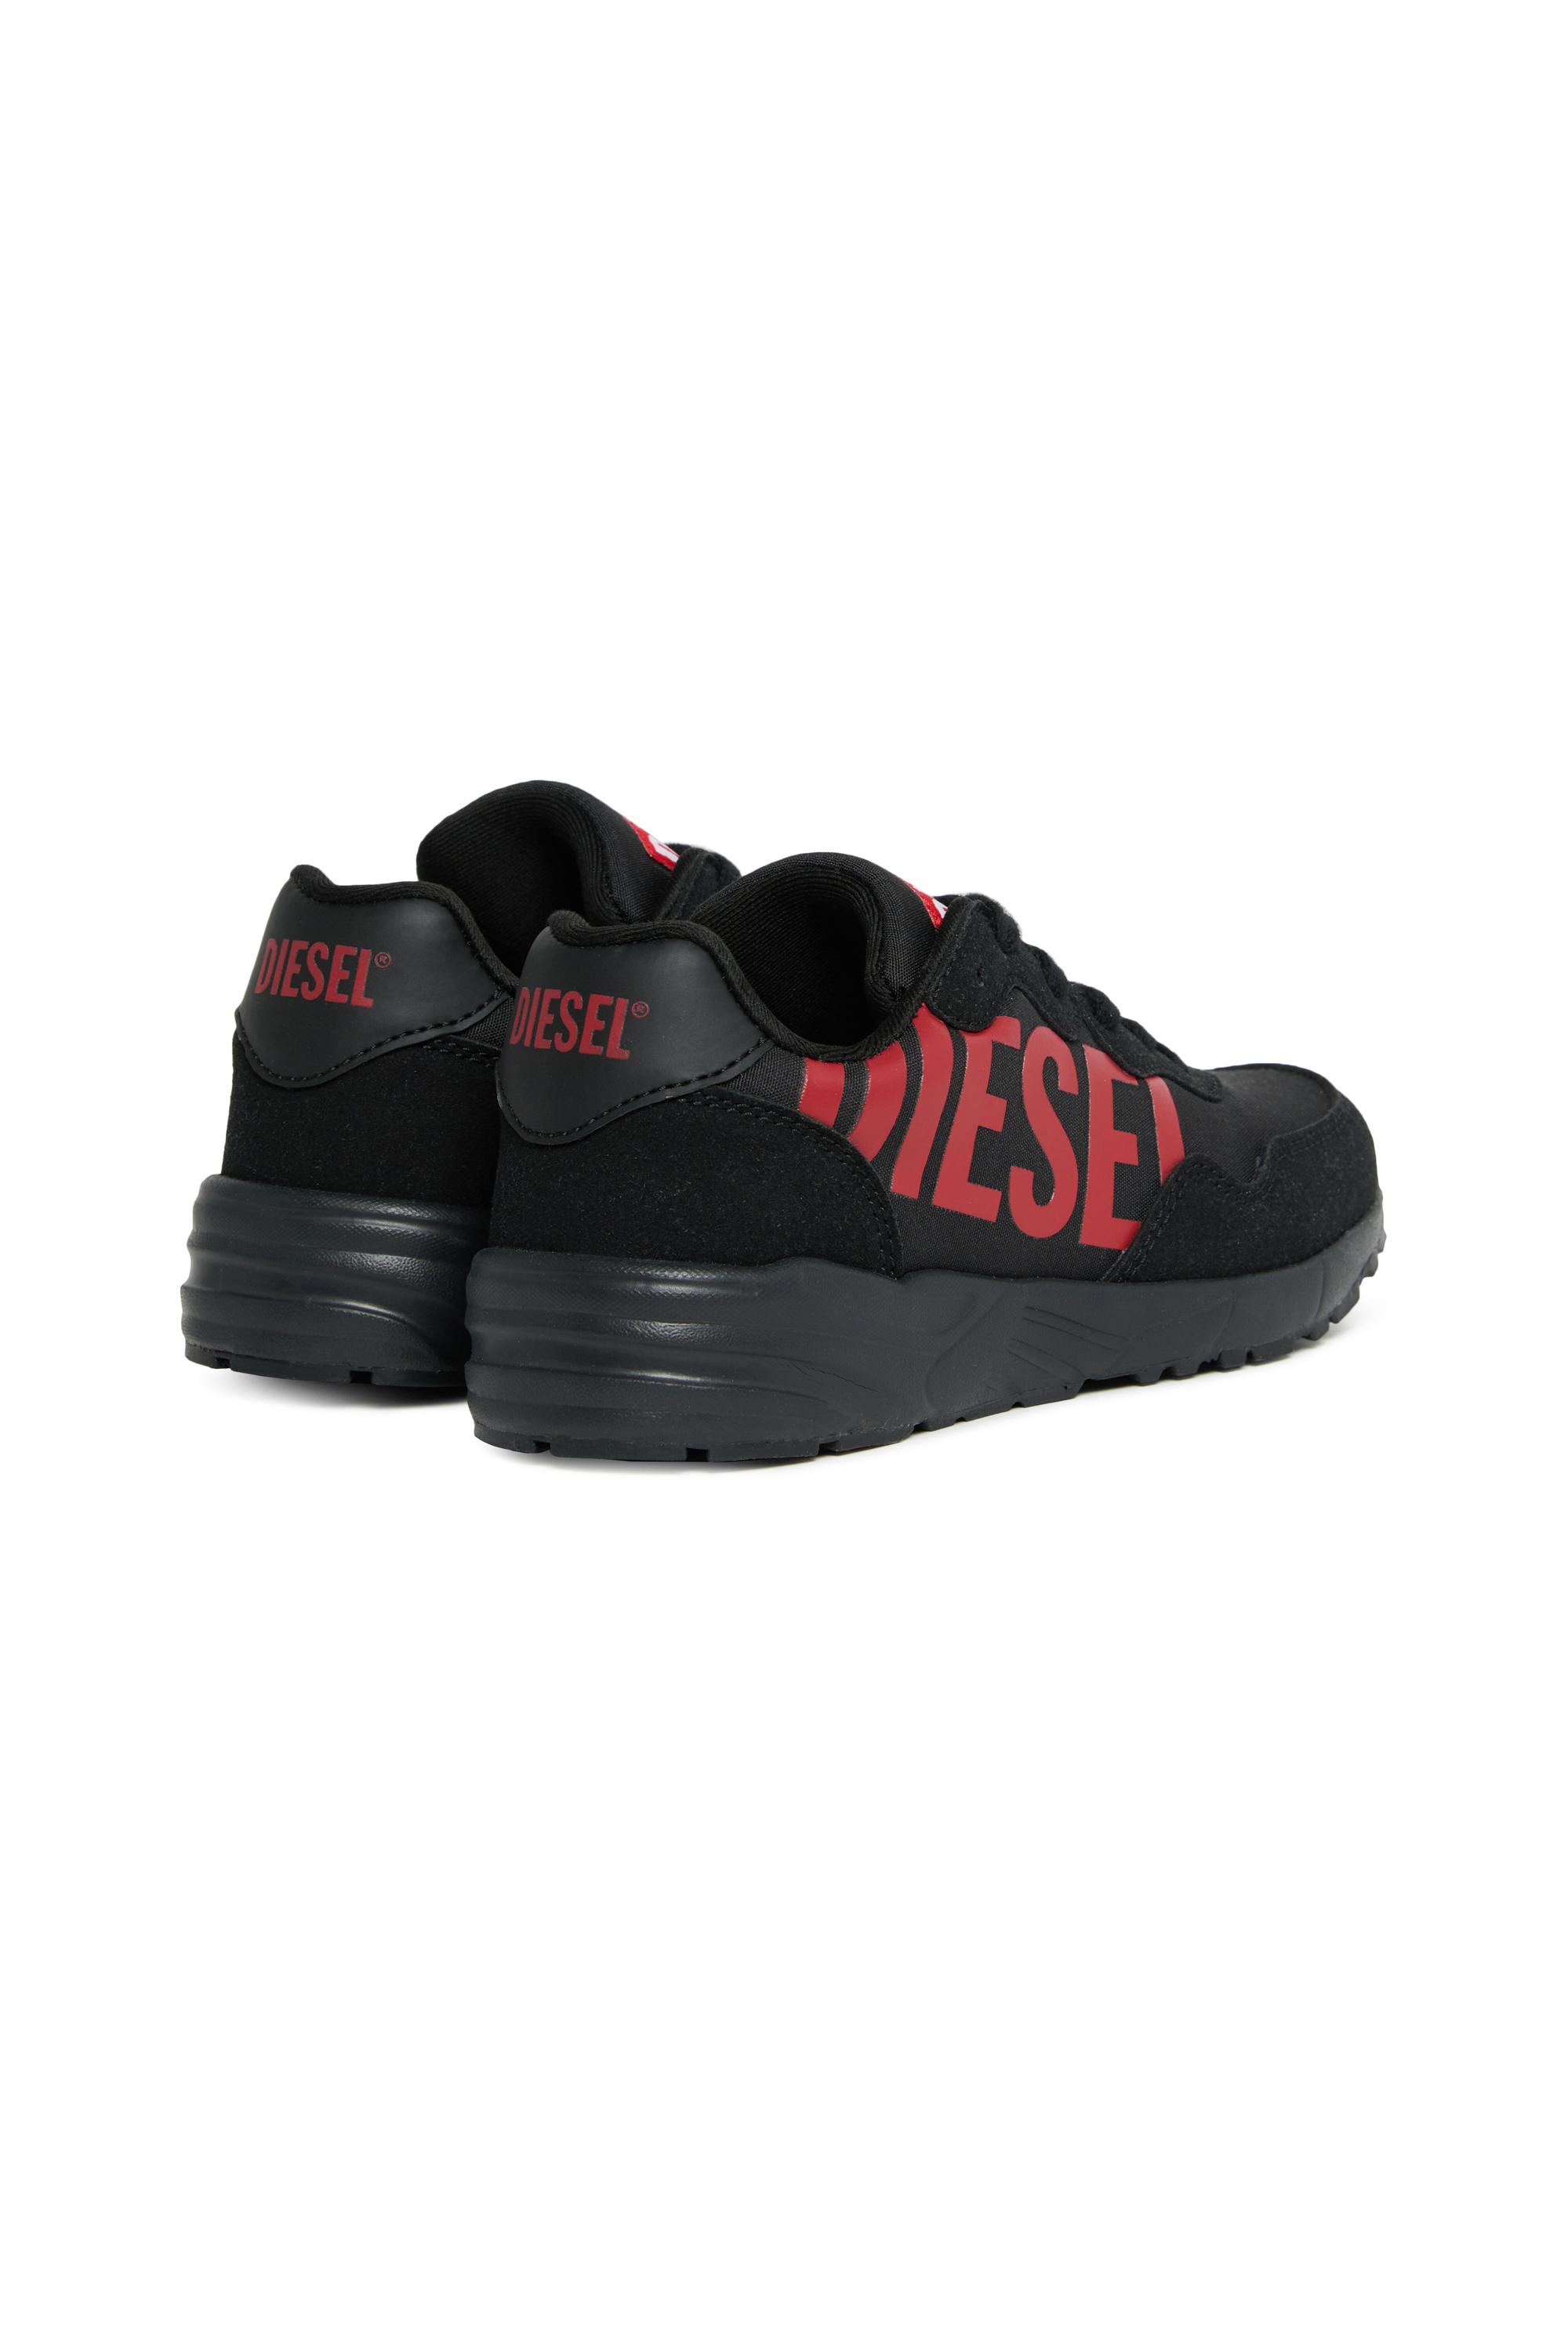 Diesel - S-STAR LIGHT LC, Unisex Nylon sneakers with shiny Diesel print in Multicolor - Image 3